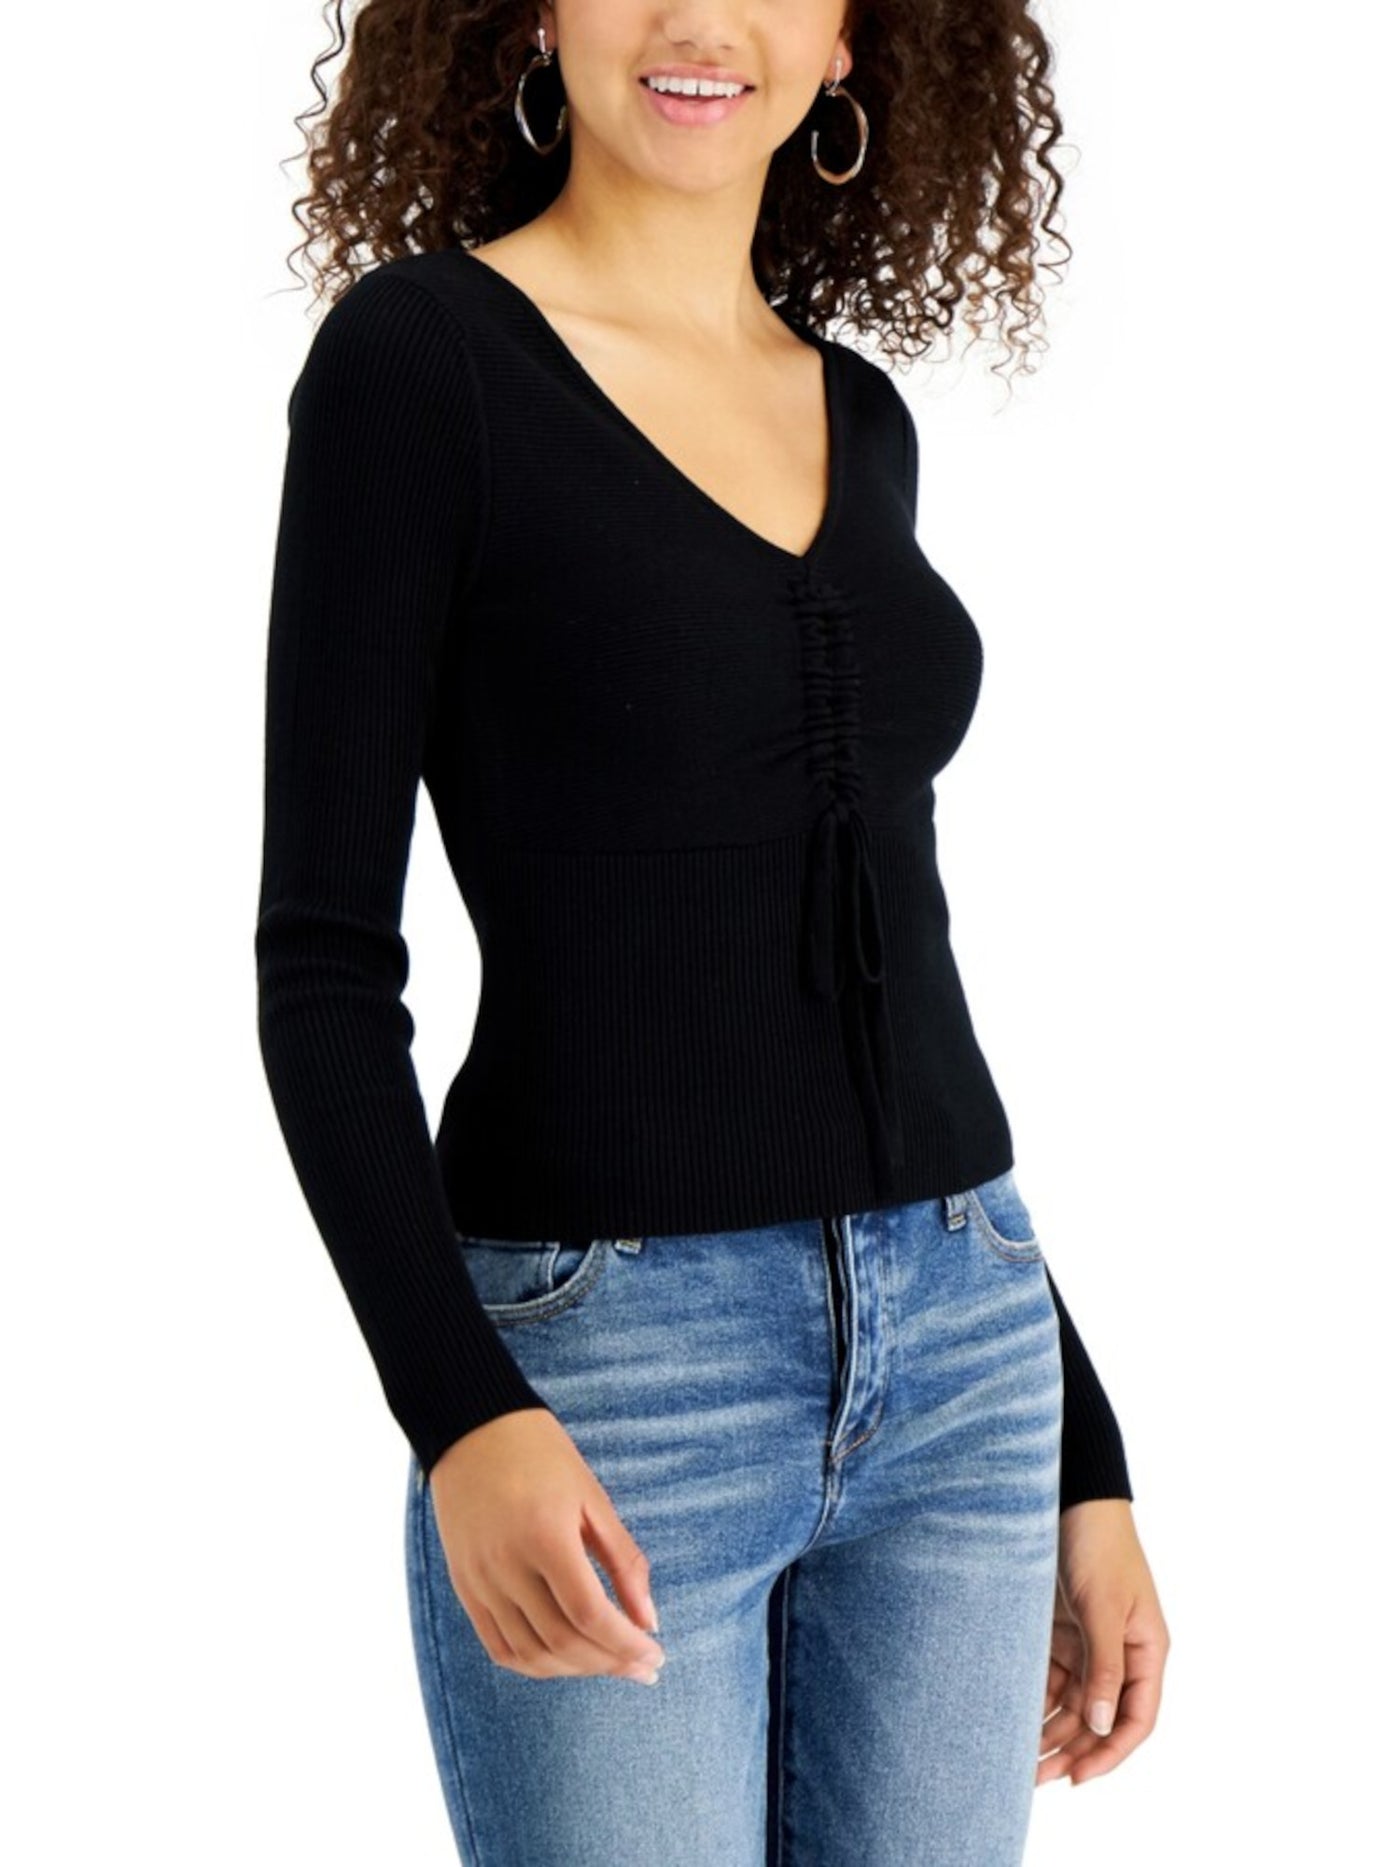 SUGAR MOON Womens Black Knit Fitted Ribbed Cinched Tie Long Sleeve V Neck Sweater Juniors S